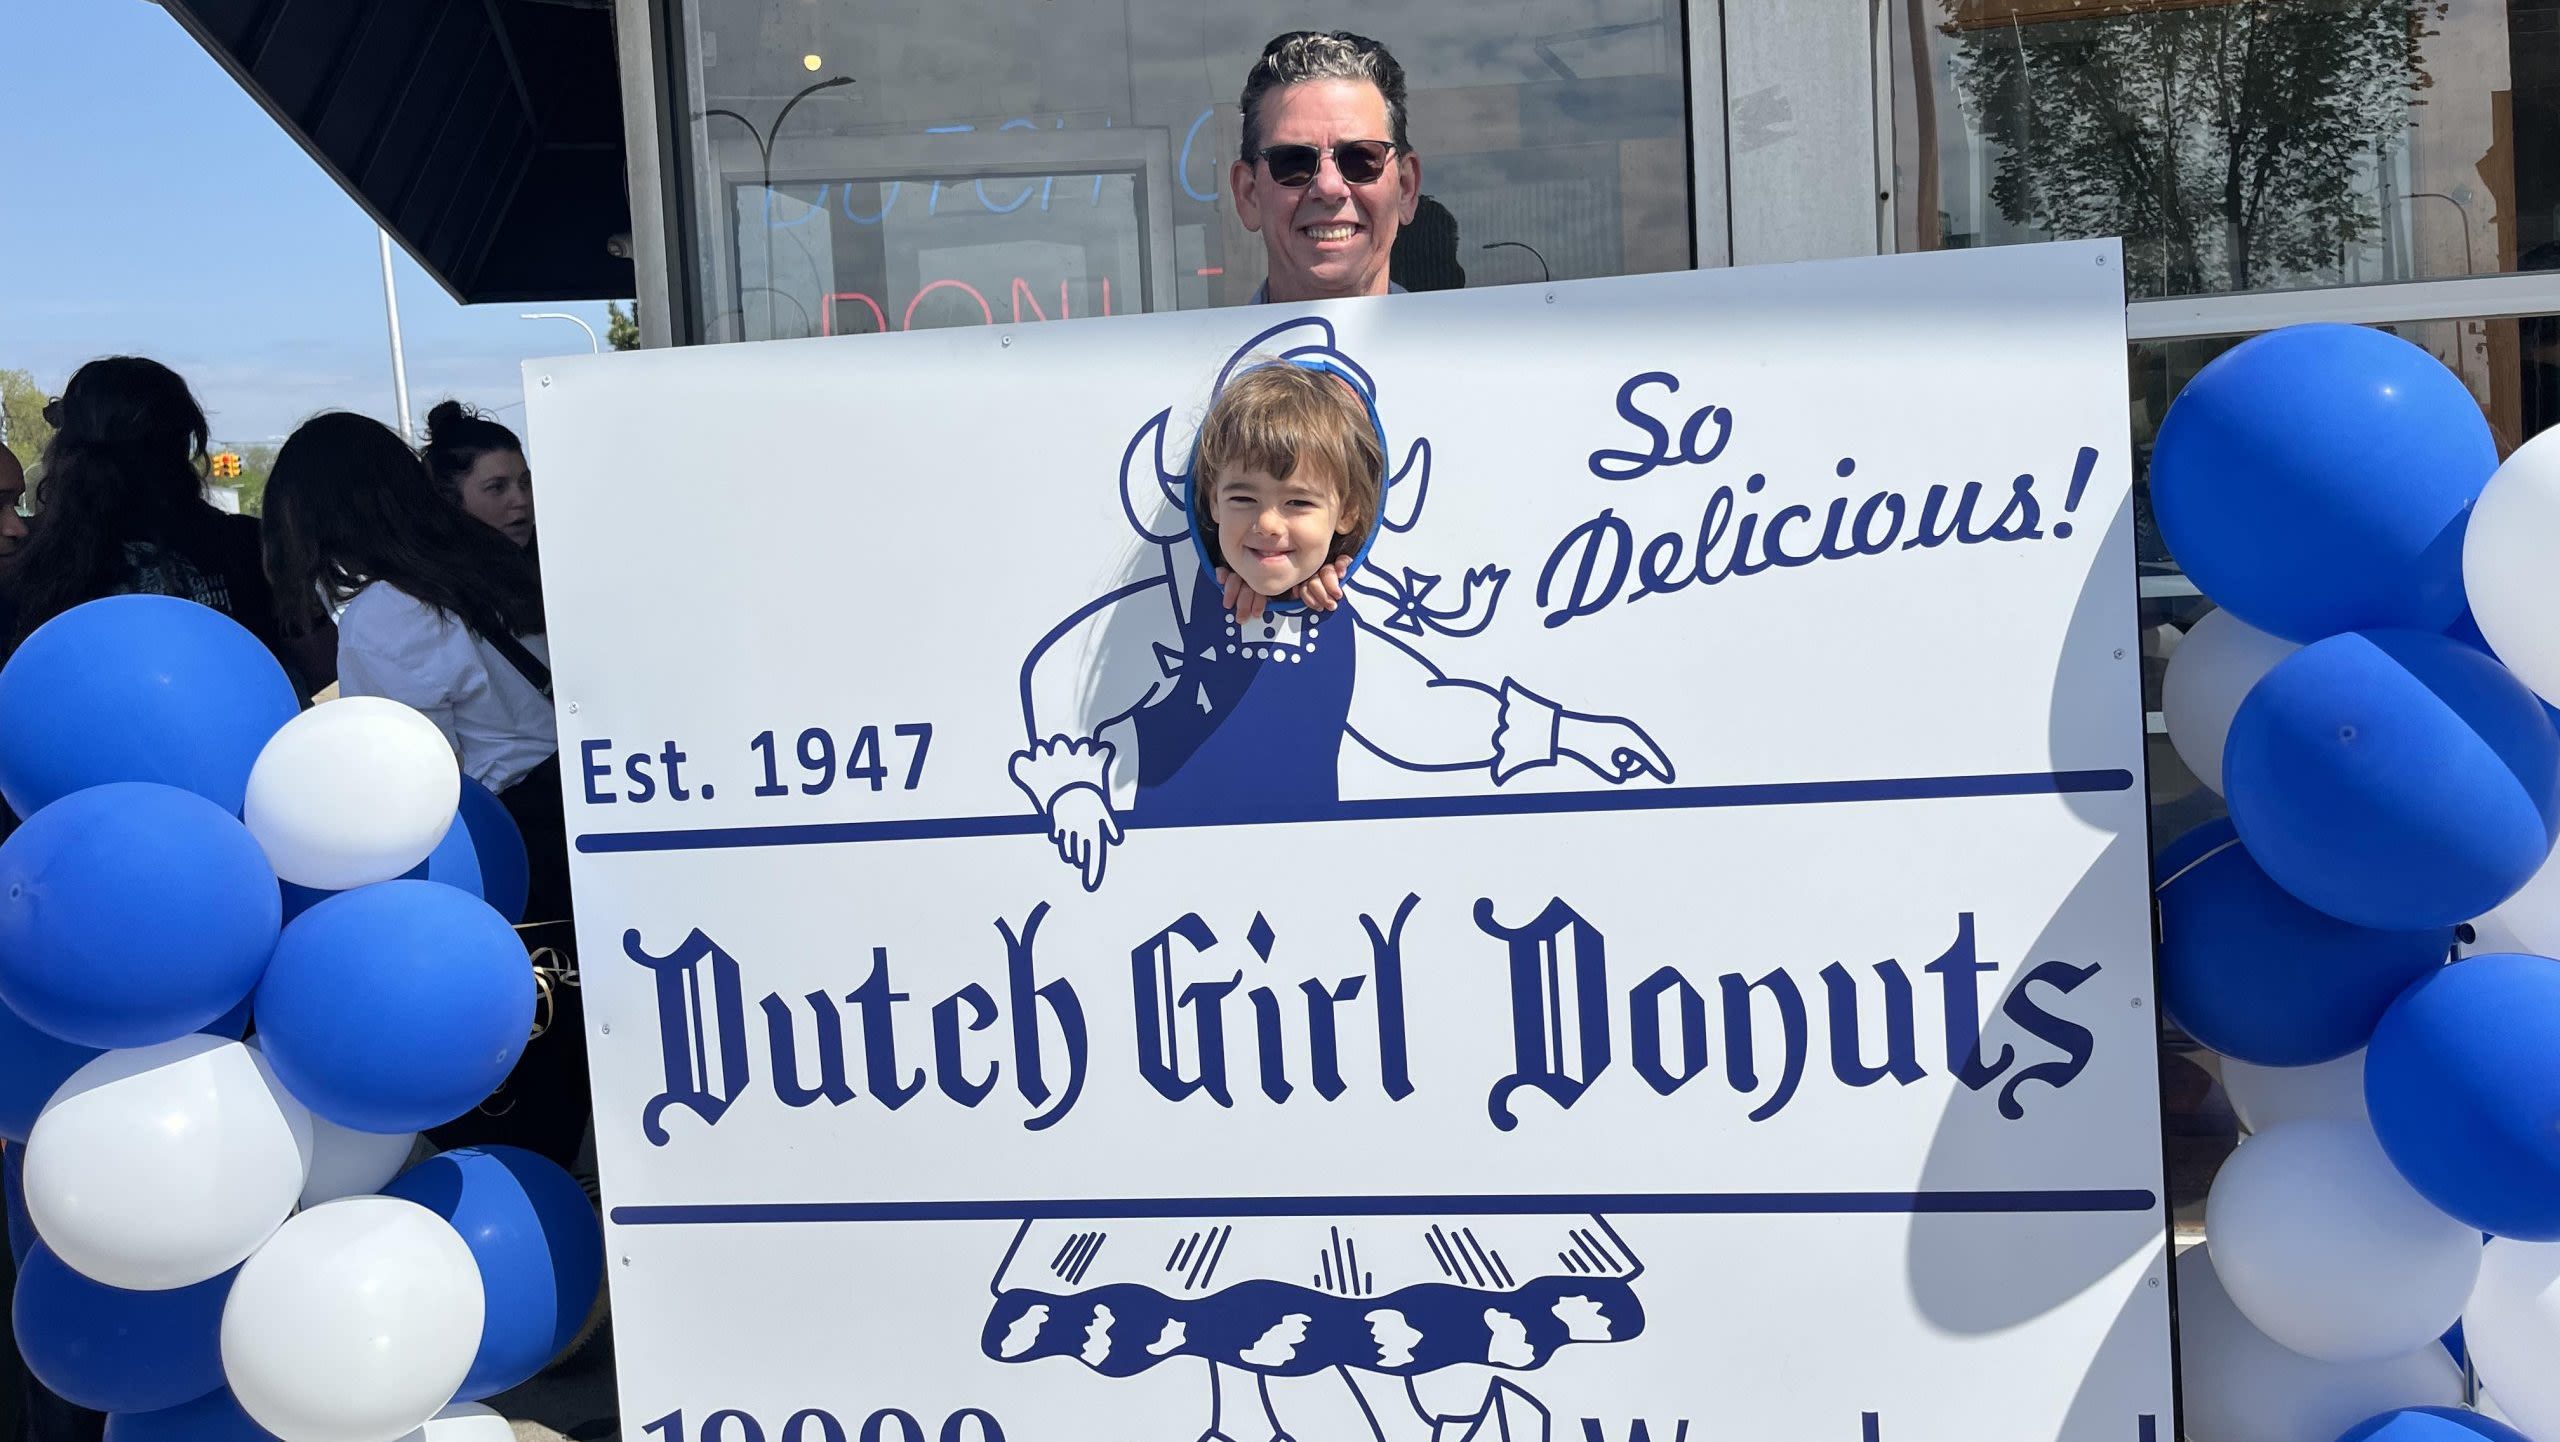 Dutch Girl Donuts to hold grand reopening this Saturday - WDET 101.9 FM